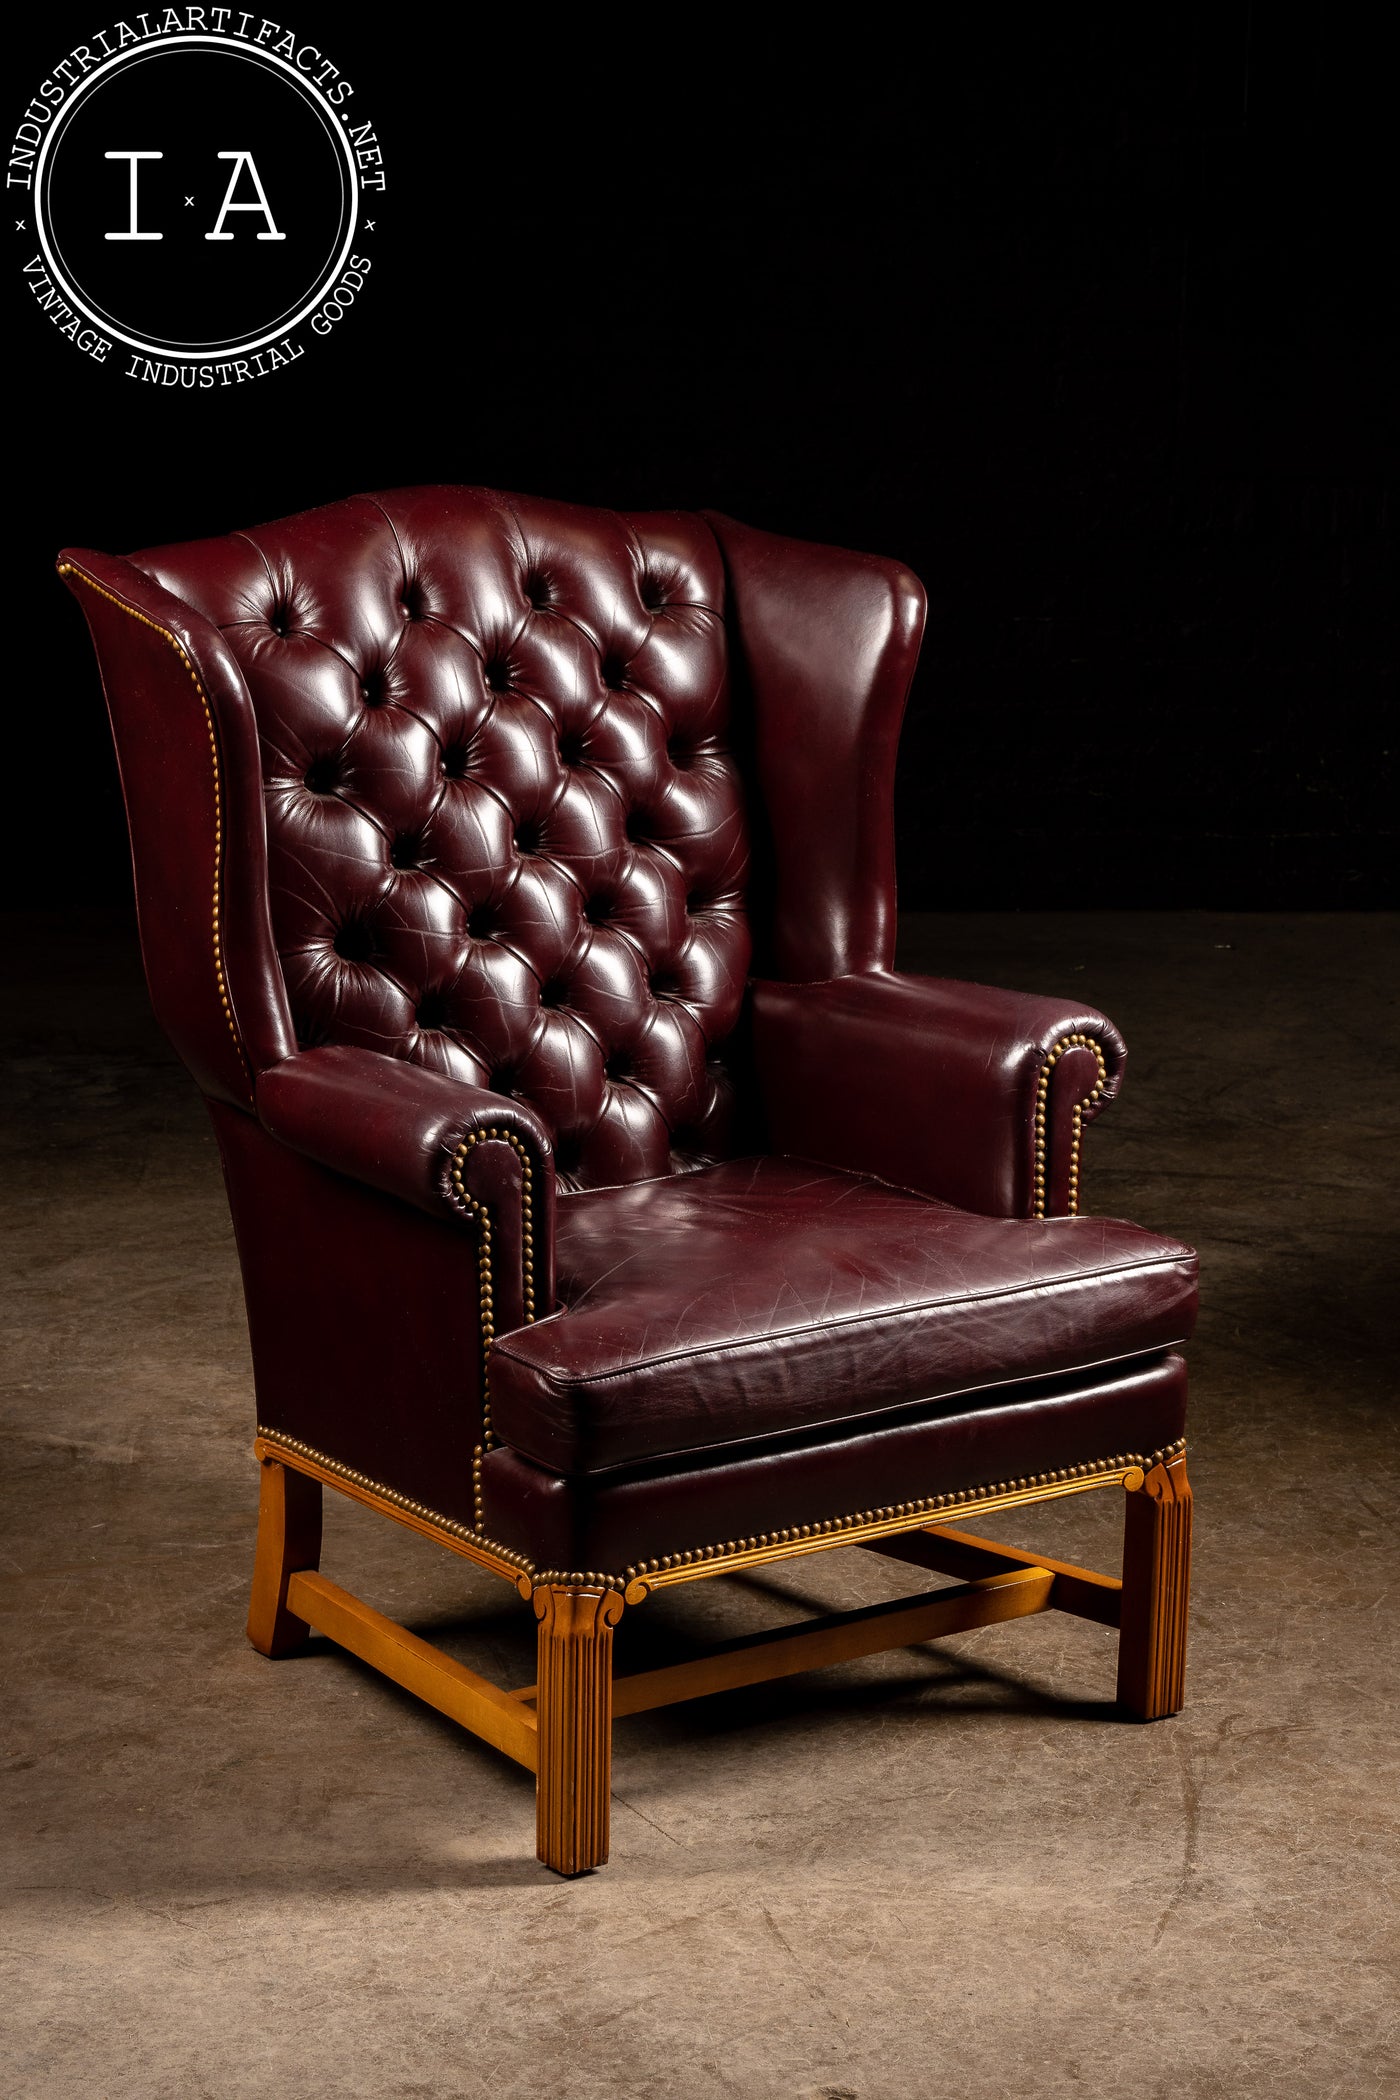 Vintage Tufted Leather Wingback Armchair in Burgundy